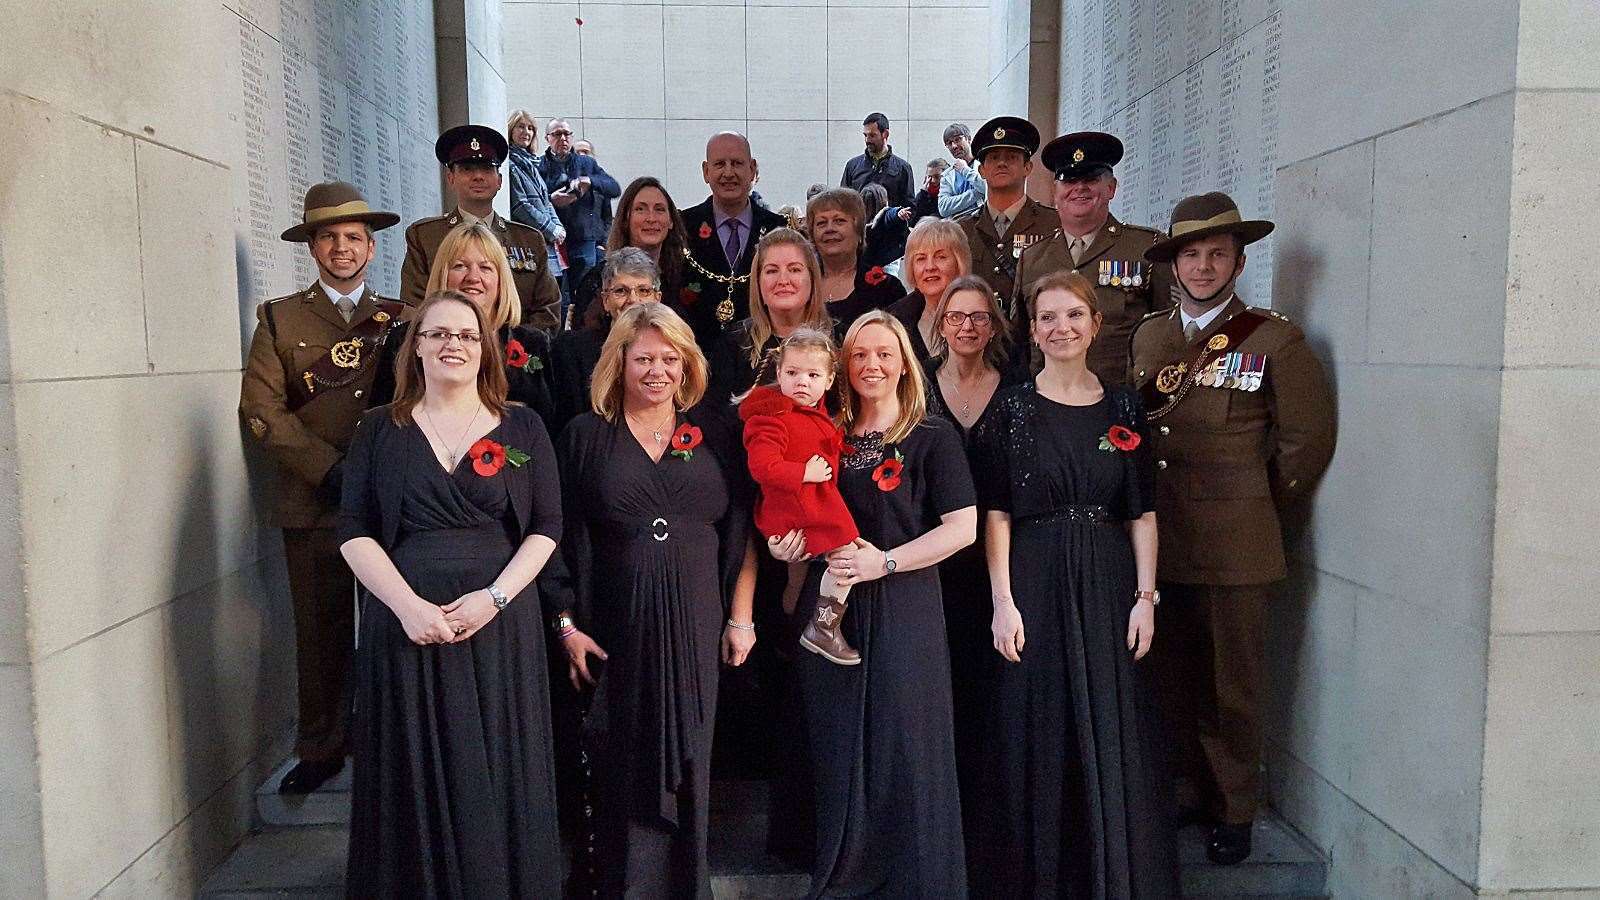 The Mayor with Gurkha officers and members of the Military Wives Choir